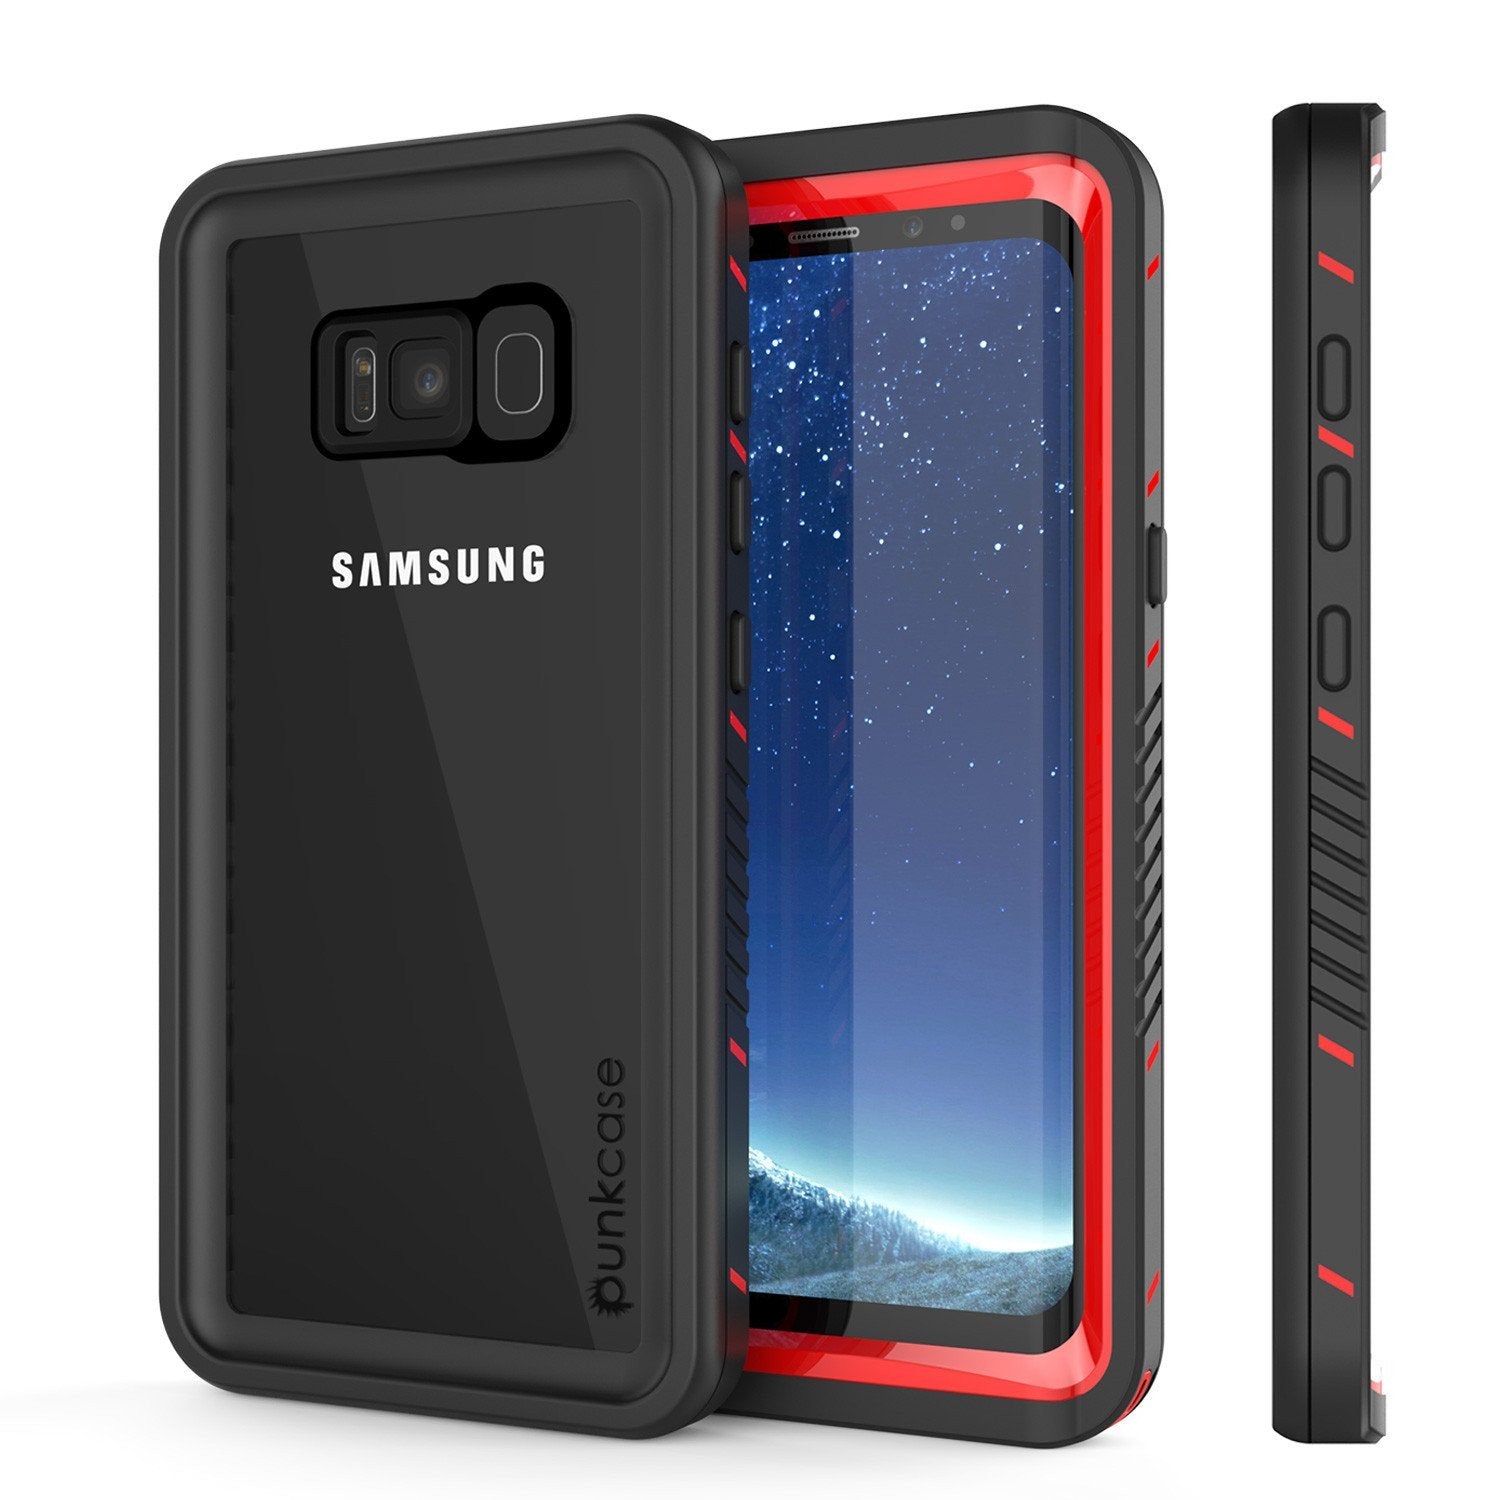 Galaxy S8 Waterproof Case, Punkcase [Extreme Series] [Slim Fit] [IP68 Certified] [Shockproof] [Snowproof] [Dirproof] Armor Cover W/ Built In Screen Protector for Samsung Galaxy S8 [Red]